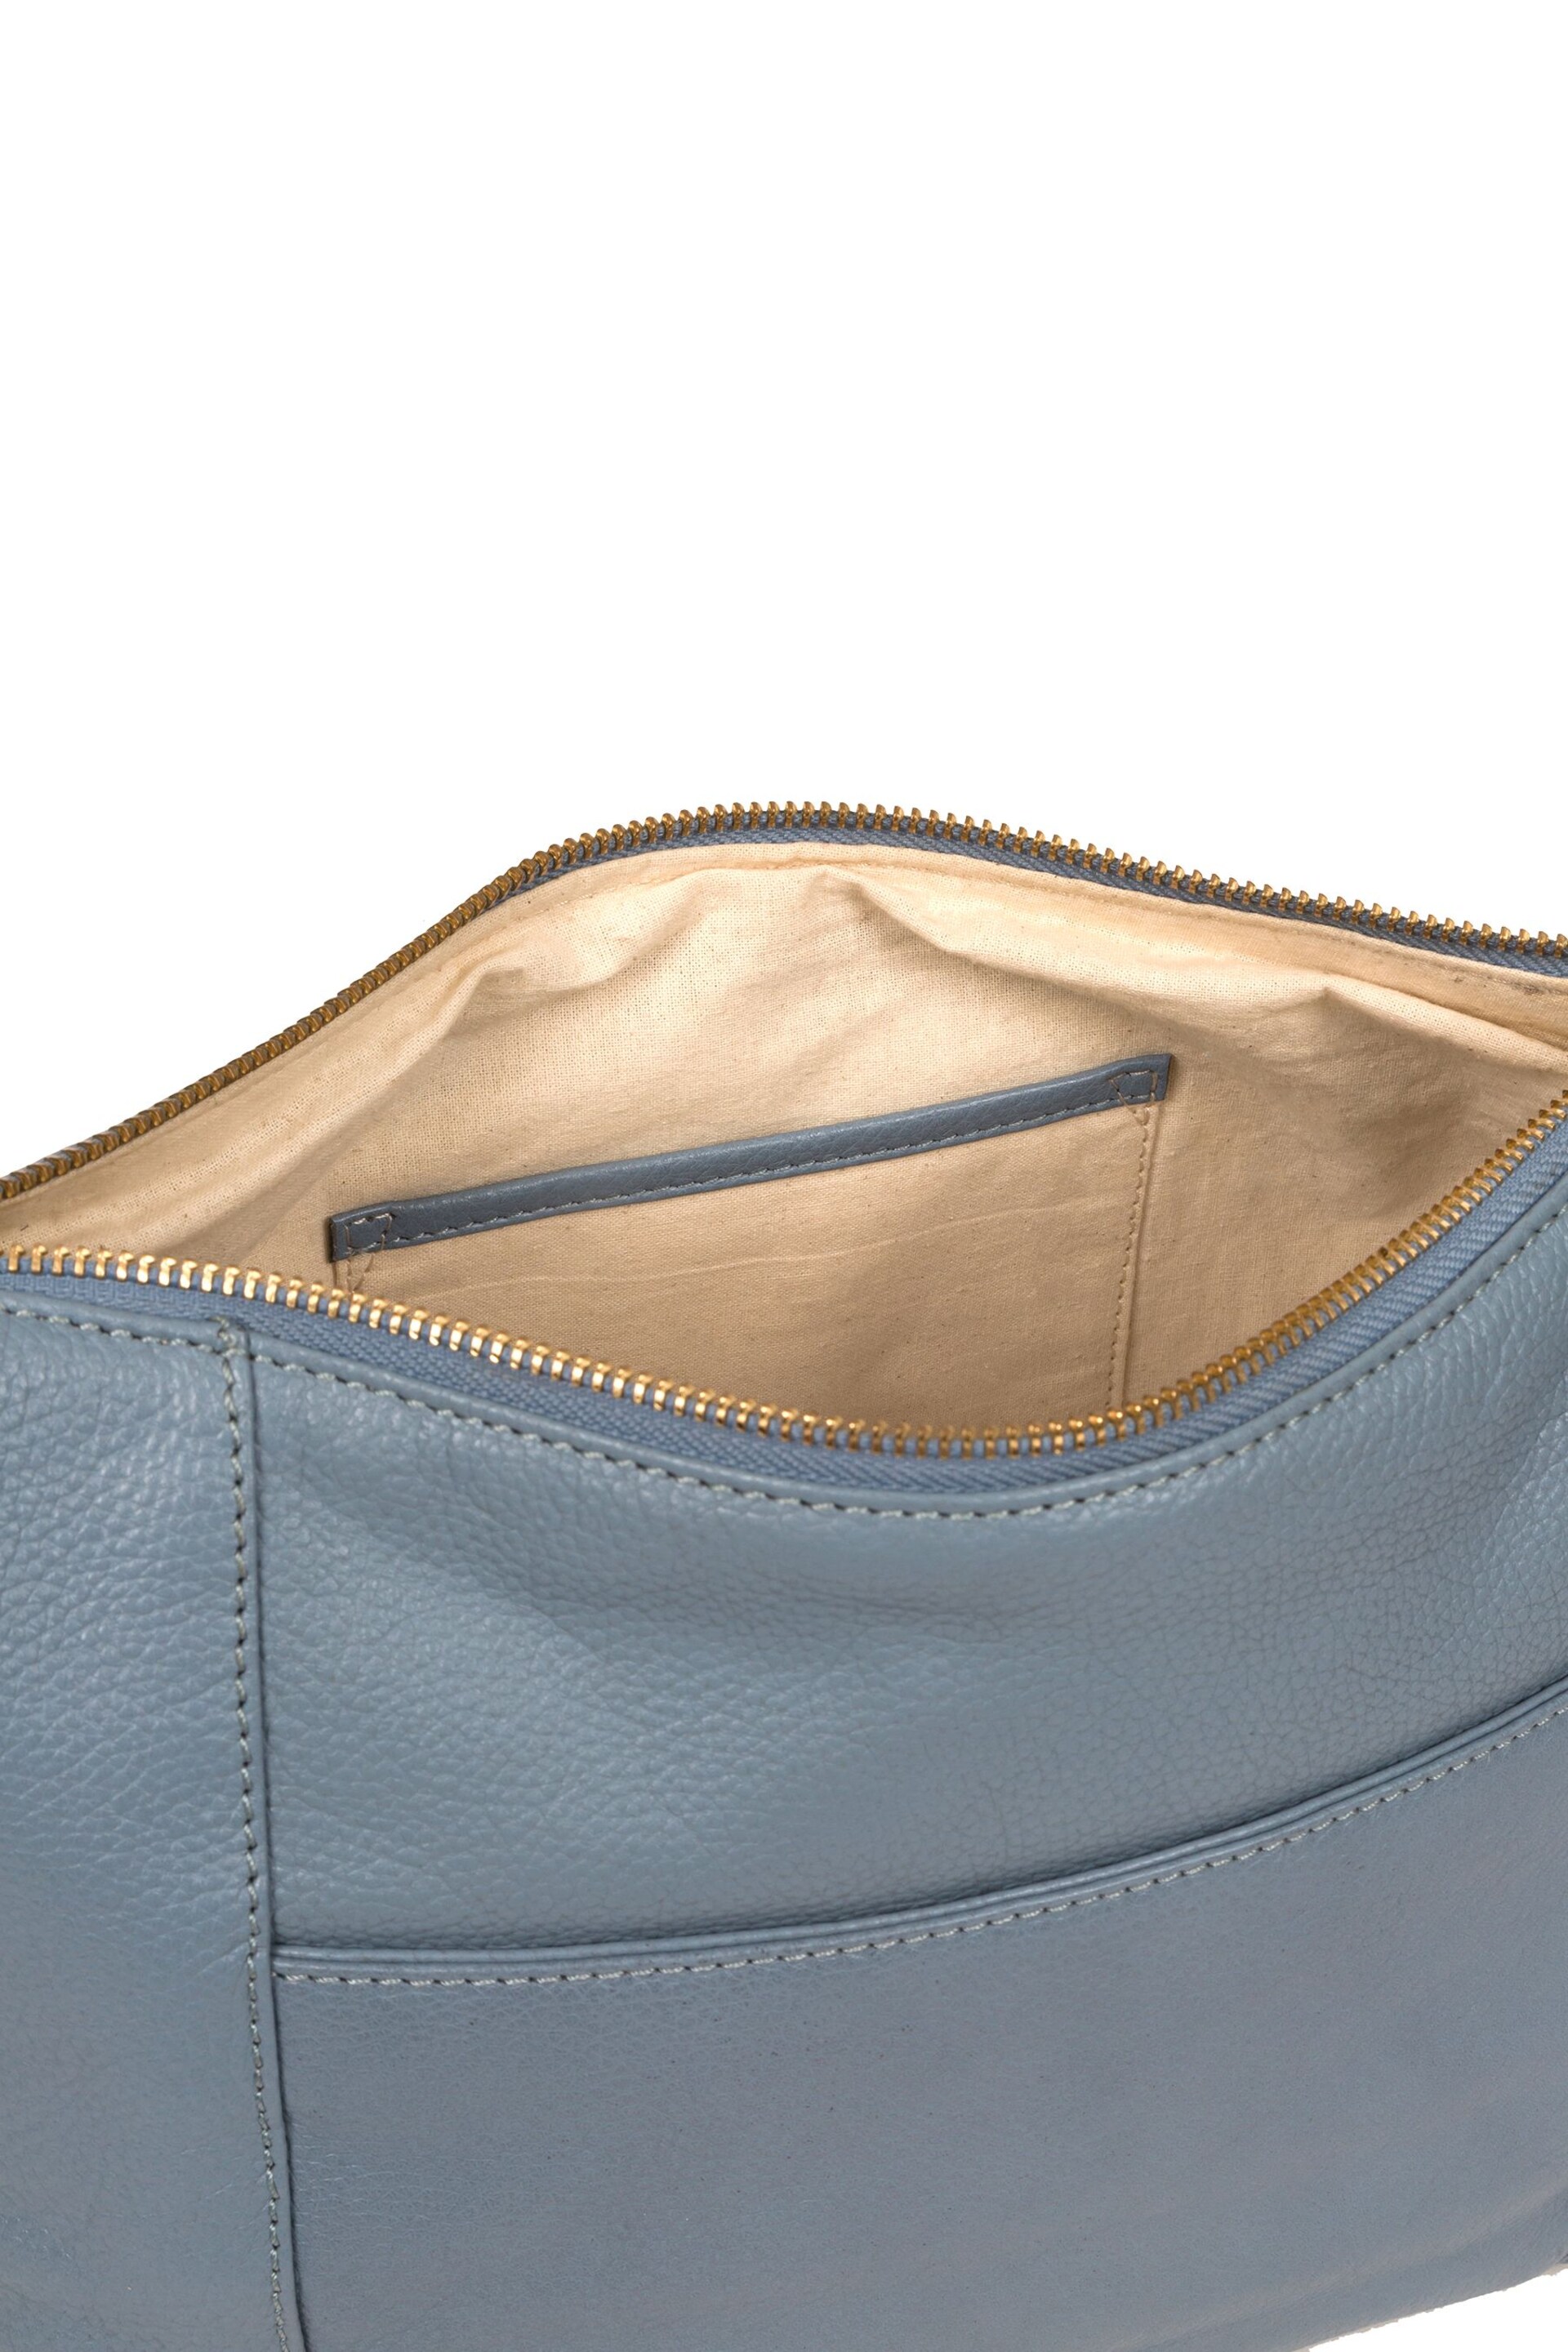 Pure Luxuries London Jenna Leather Shoulder Bag - Image 5 of 6